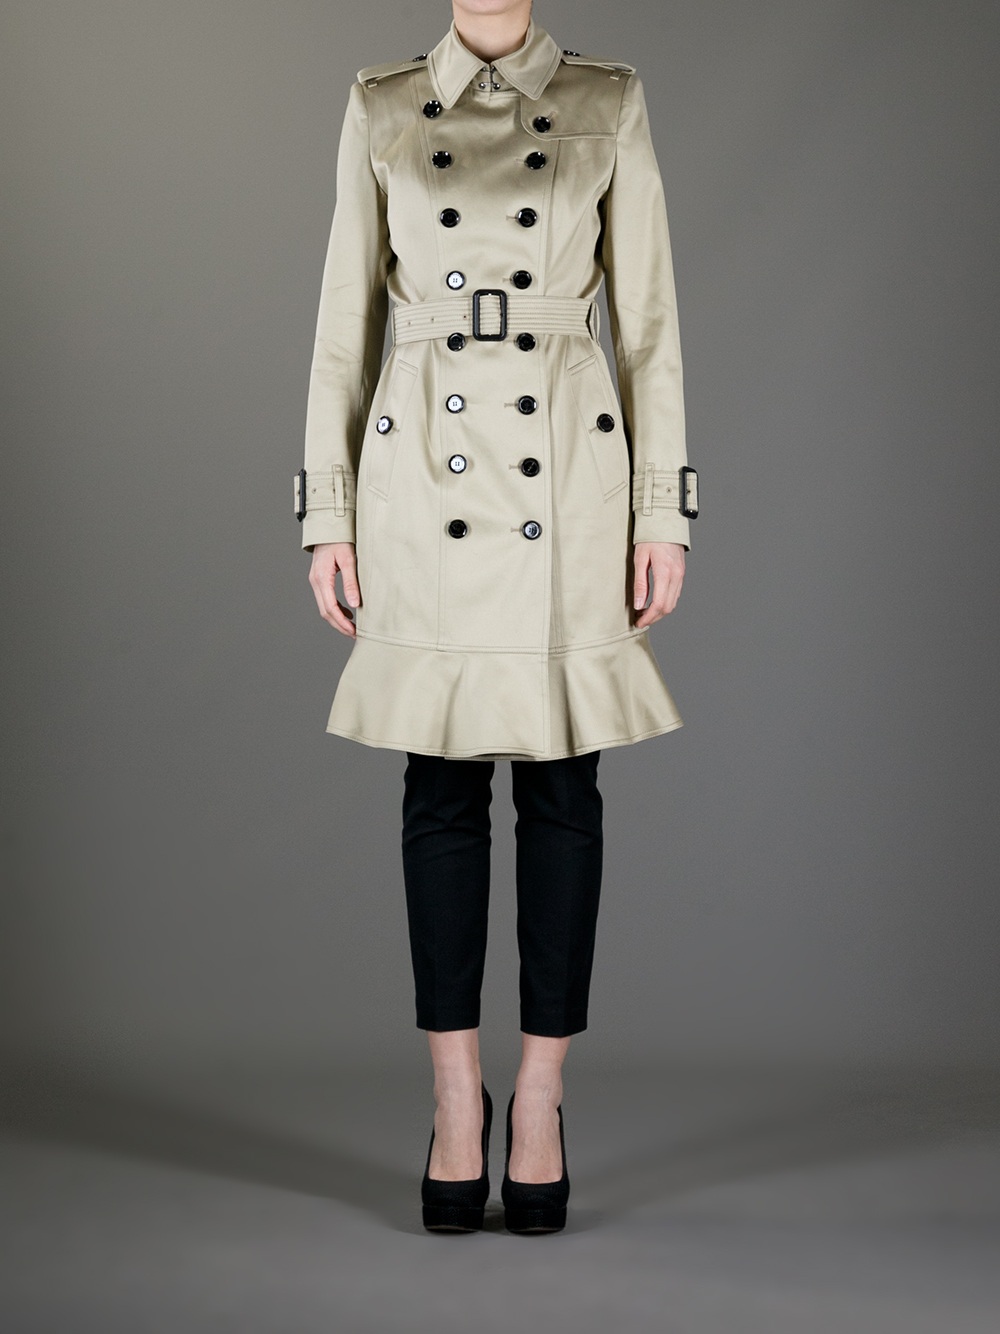 Lyst - Burberry Brit Frill Hem Trench Coat in Natural